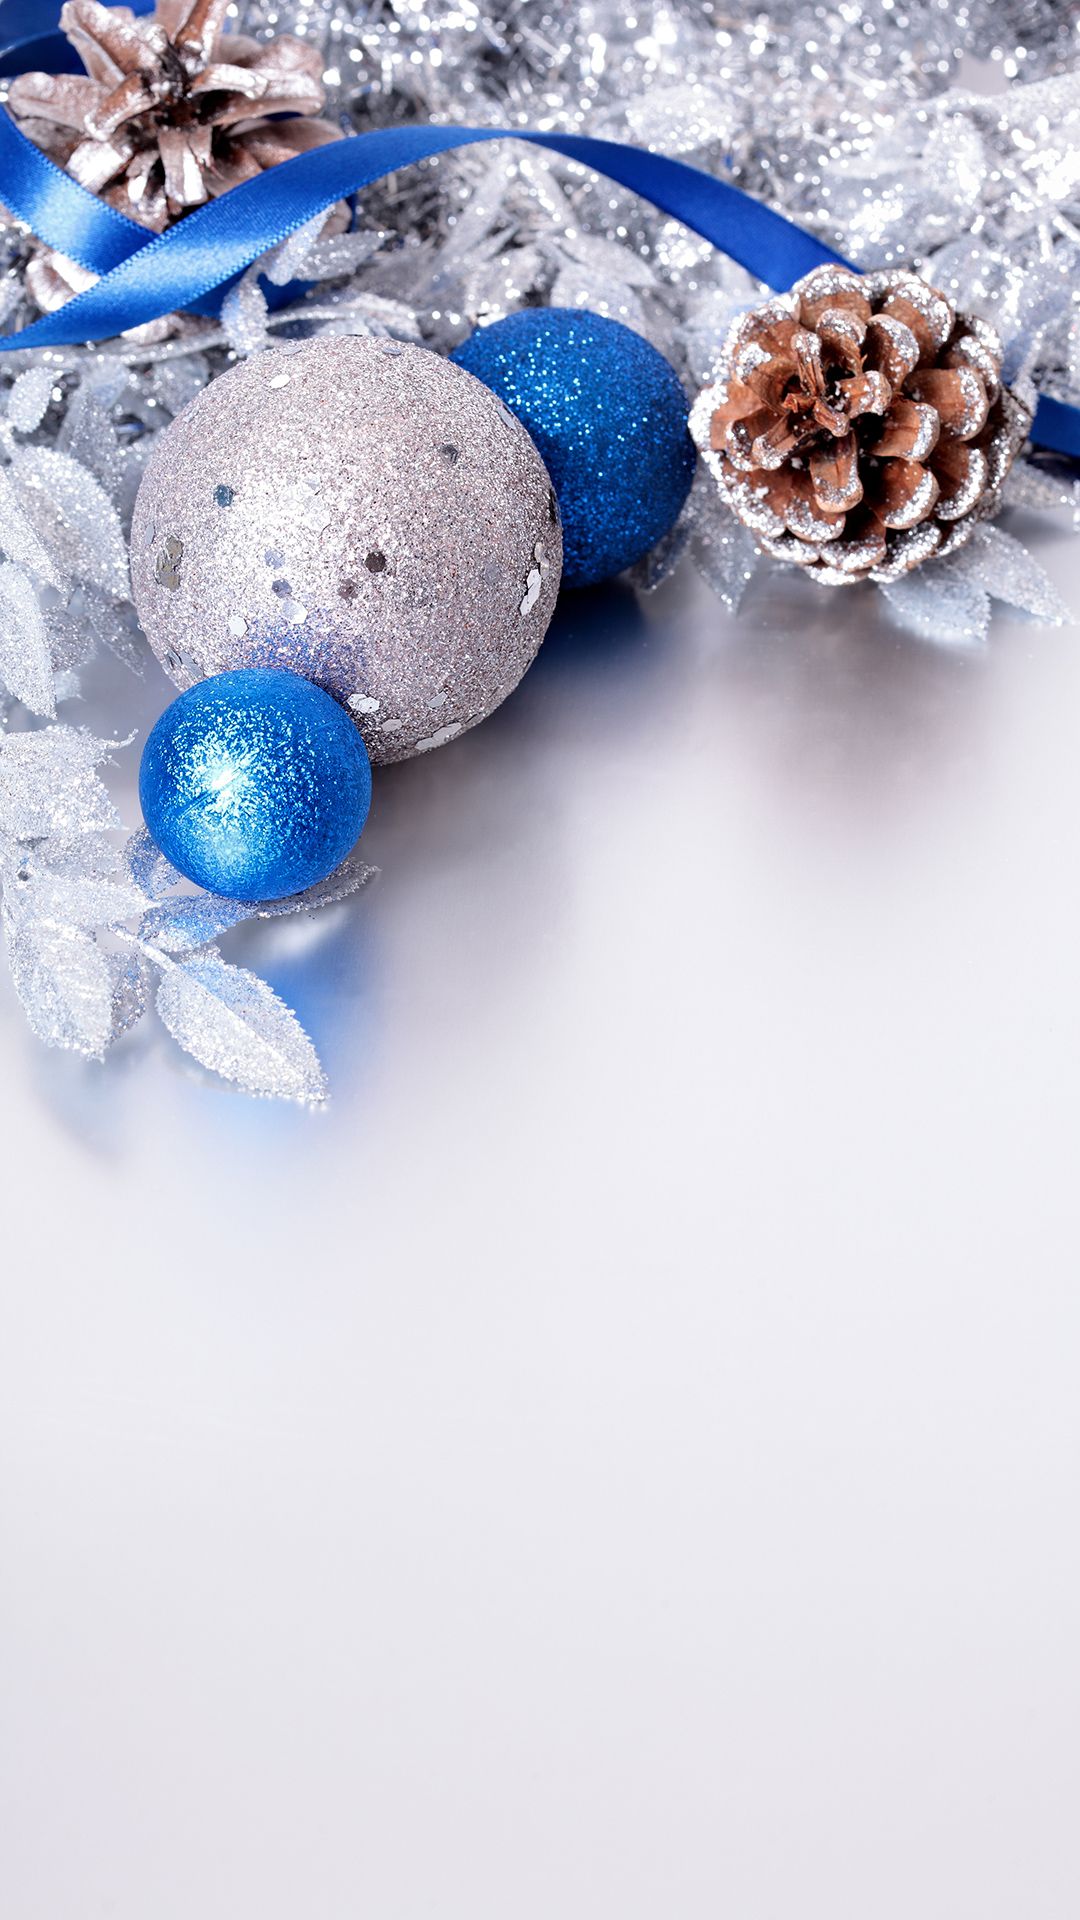 Christmas Silver and Blue iPhone 6S Plus Wallpaper​-Qual. Wallpaper iphone christmas, Christmas phone wallpaper, Christmas wallpaper